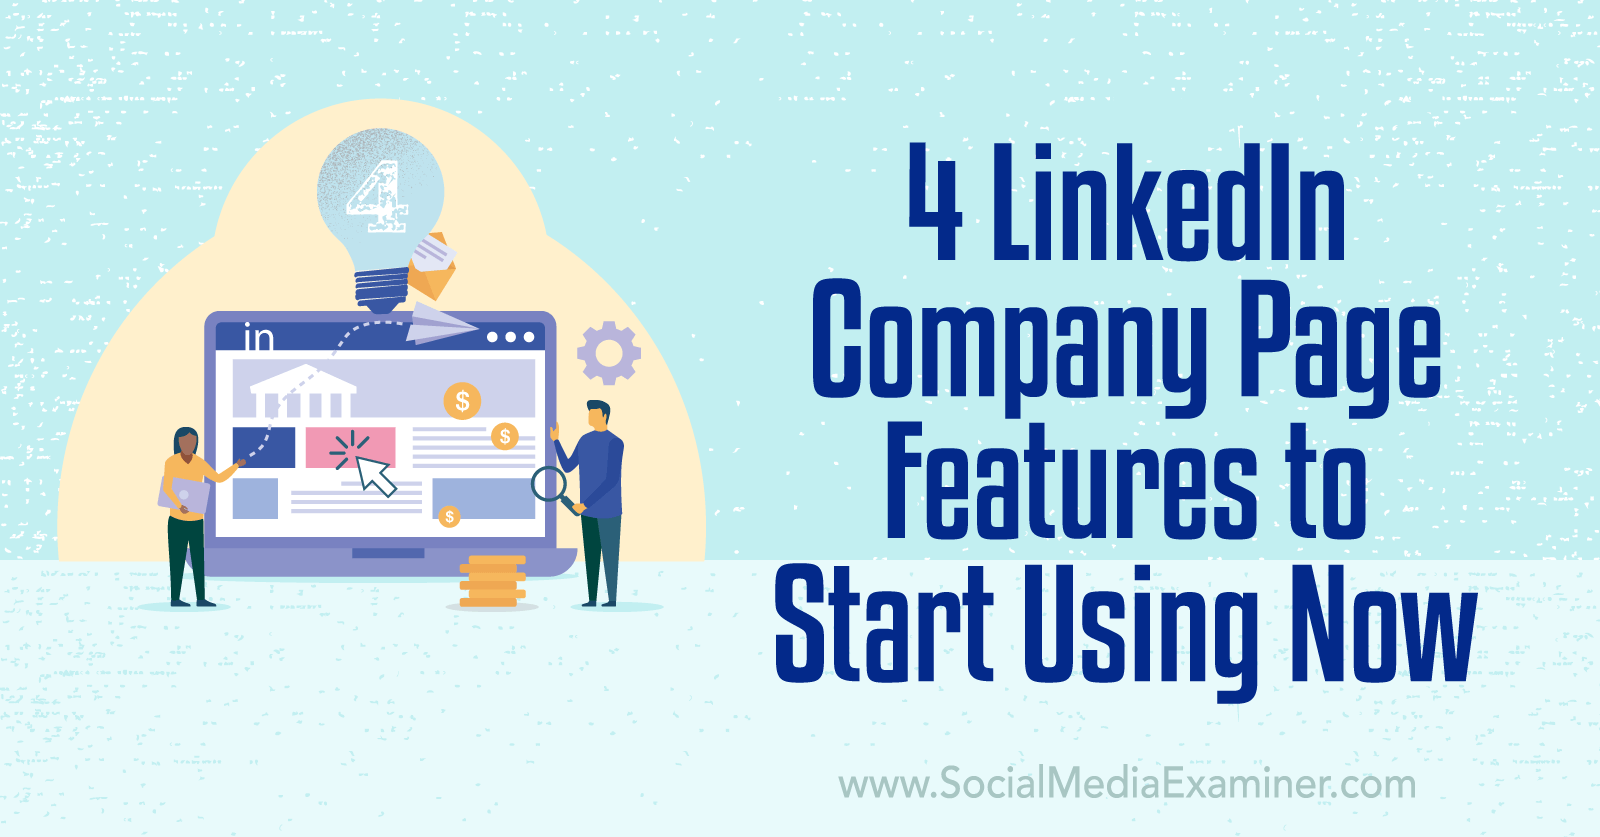 4 LinkedIn Company Page Features to Start Using Now-Social Media Examiner